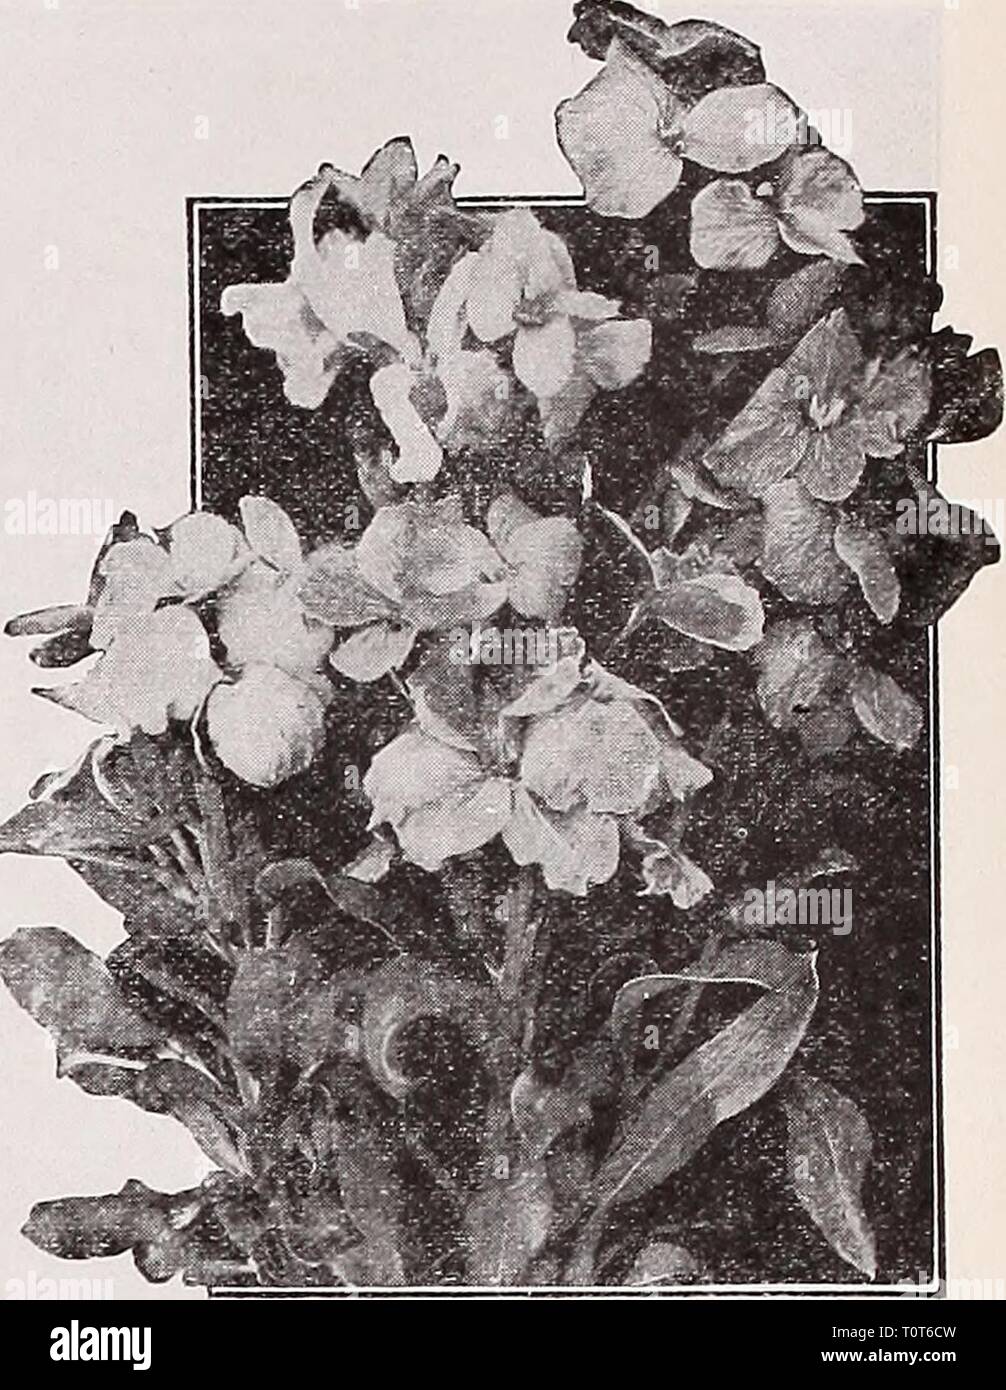 Dreer's autumn catalogue 1932 (1932) Dreer's autumn catalogue 1932  dreersautumncata1932henr Year: 1932  Single Wallflower Veronica (Speedwell) PER PKT 4372 Incana. Bright silvery foliage, blue flowers; July and August; 1 foot. A splendid variety for the rockery. Special pkt, 75 cts $0 25 4374 Maritima. A very pretty Speed- well growing about 2 feet high and producing long spikes of blue flowers from July to September.  oz., 50 cts IS 4375 Repens. A useful rock or carpet- ing plant, with light blue flowers; May and June. Special pkt., 75 cts. 25 4376 Spicata. An elegant hardy border plant, gr Stock Photo